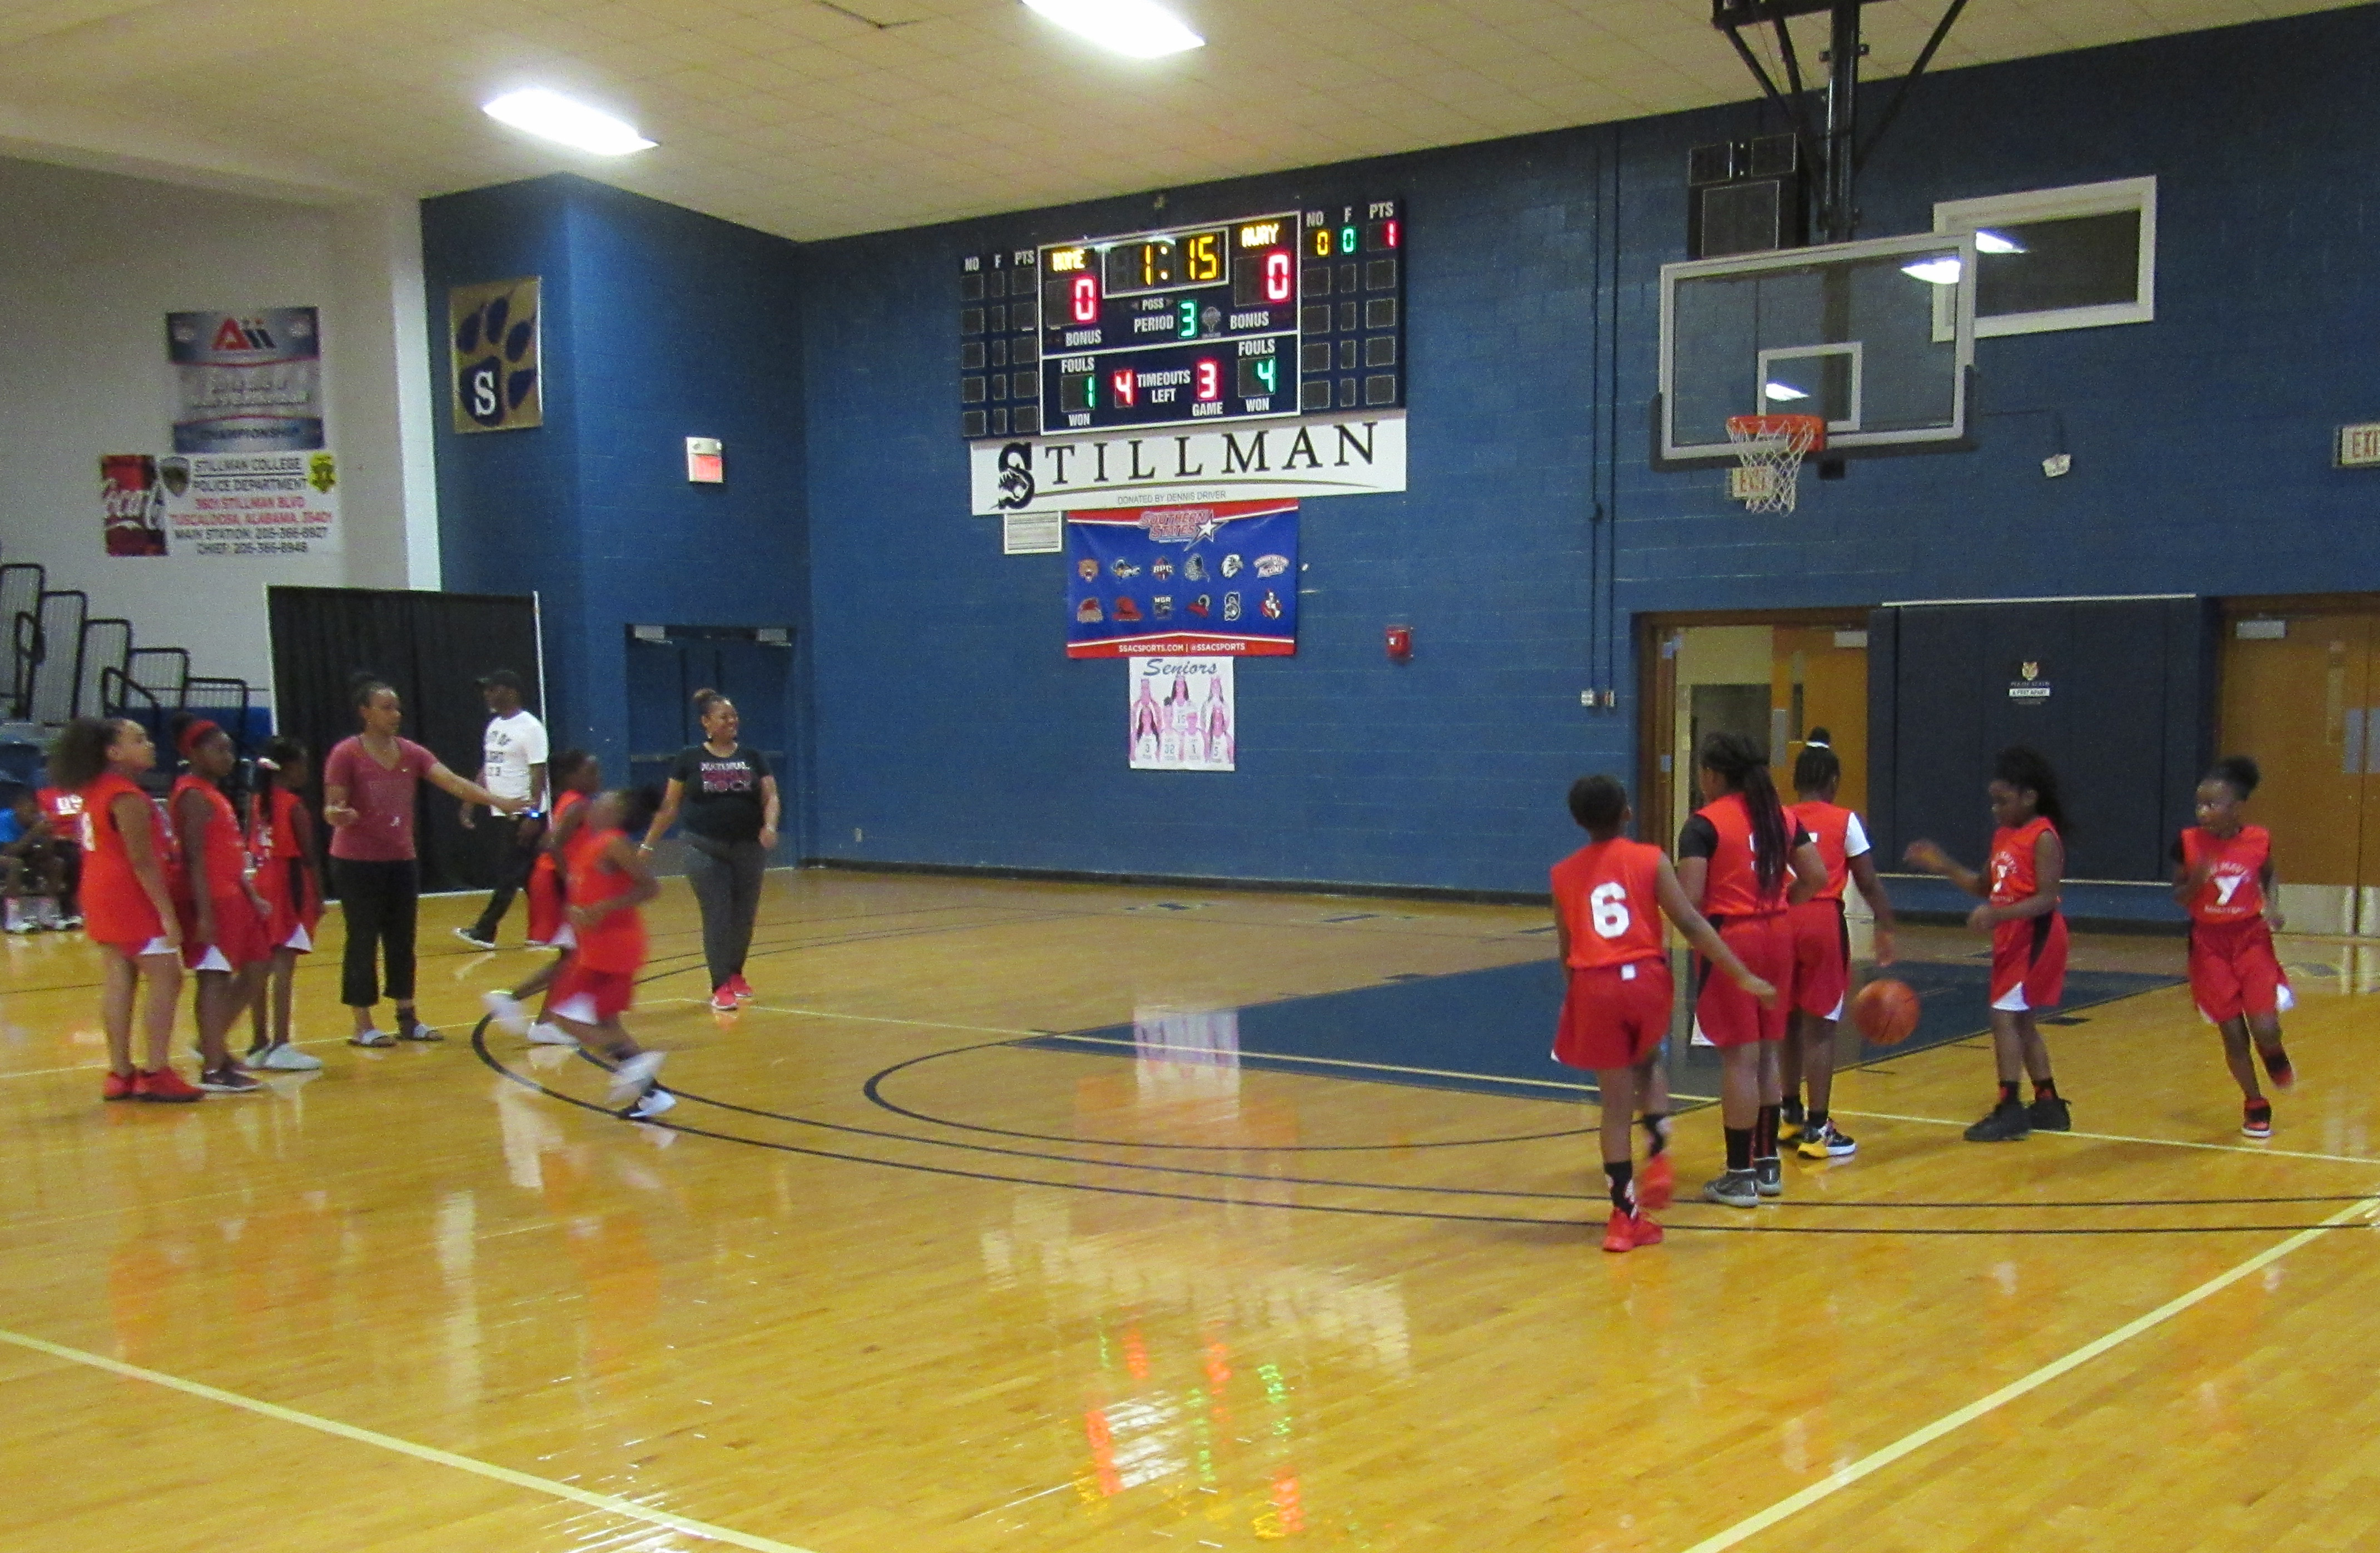 A group of black children play basketball on an indoor court